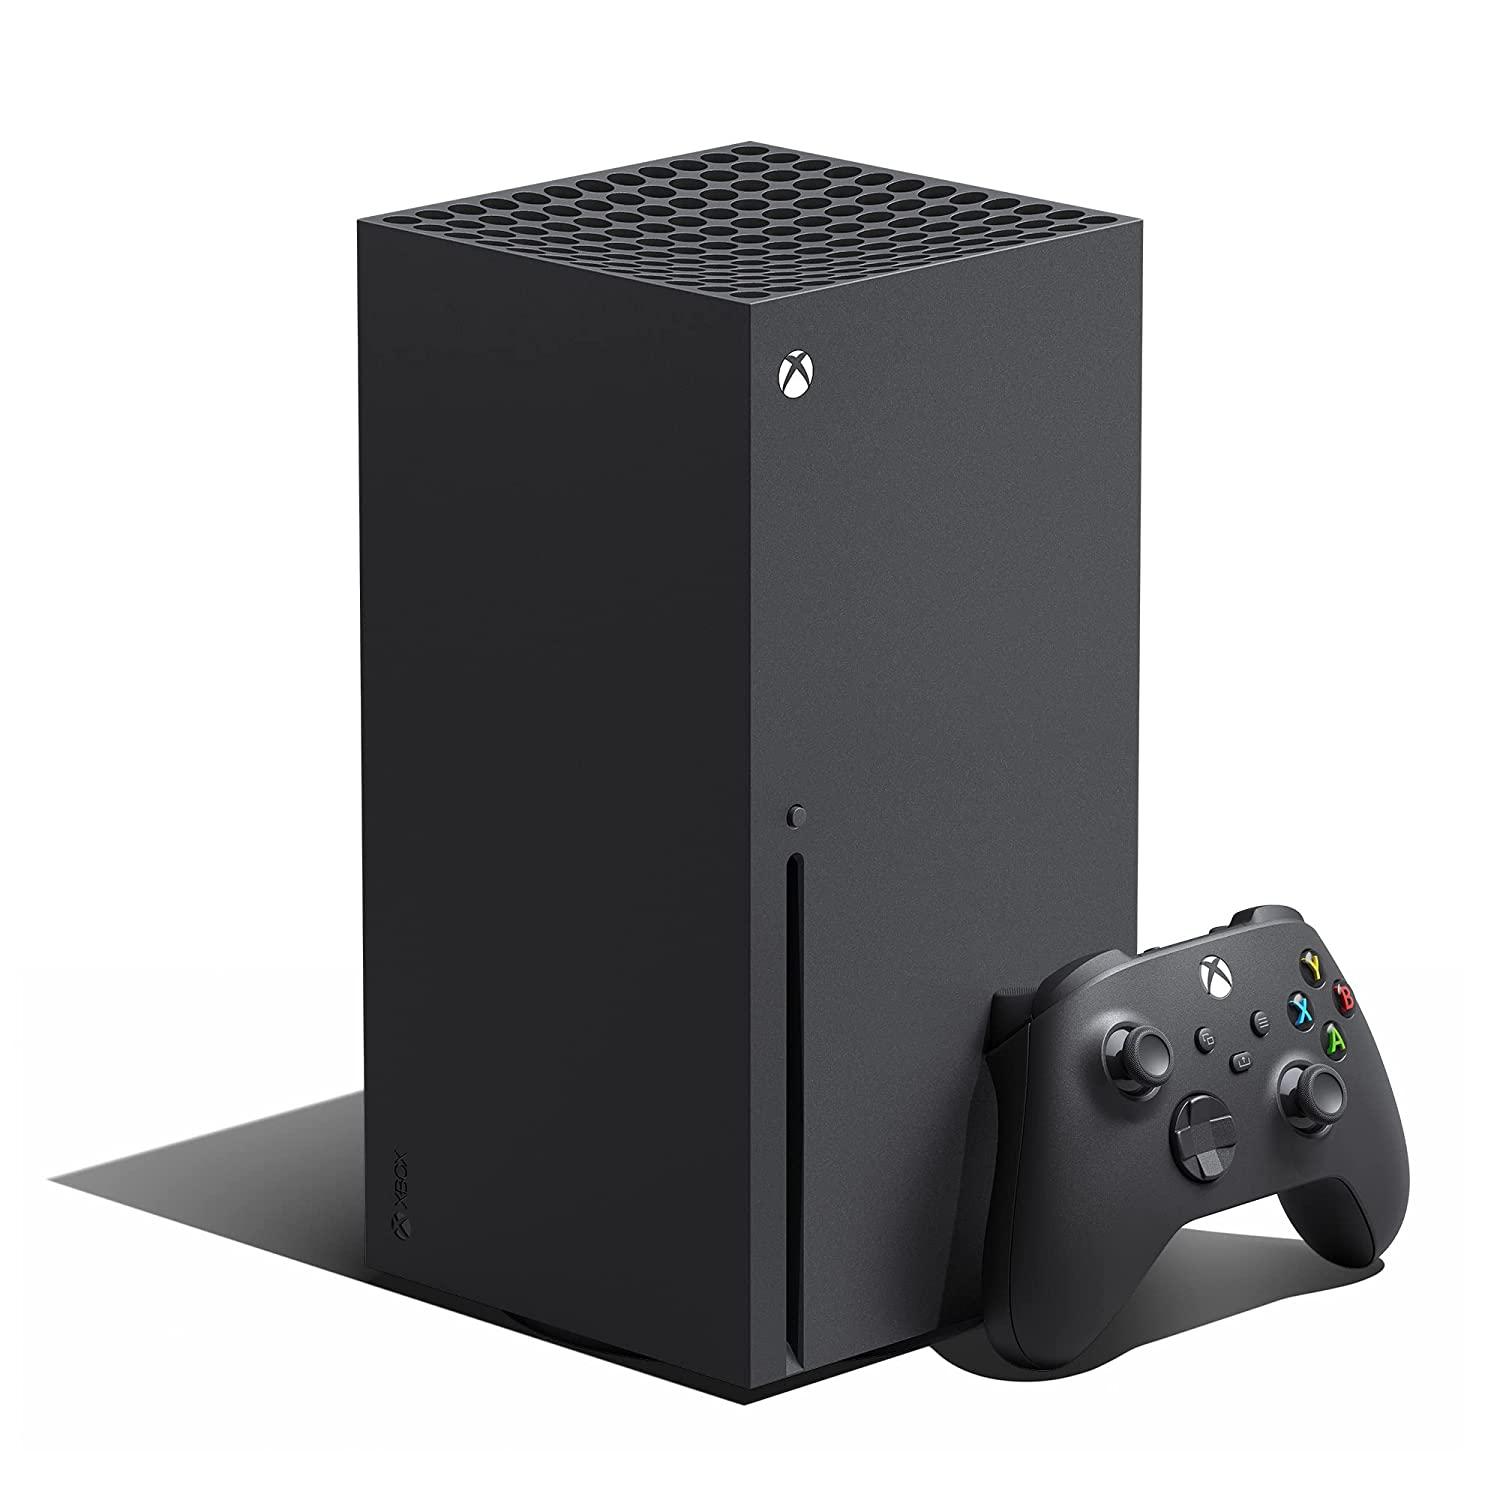 Xbox Series X Video Game Console Available for $499 Shipped